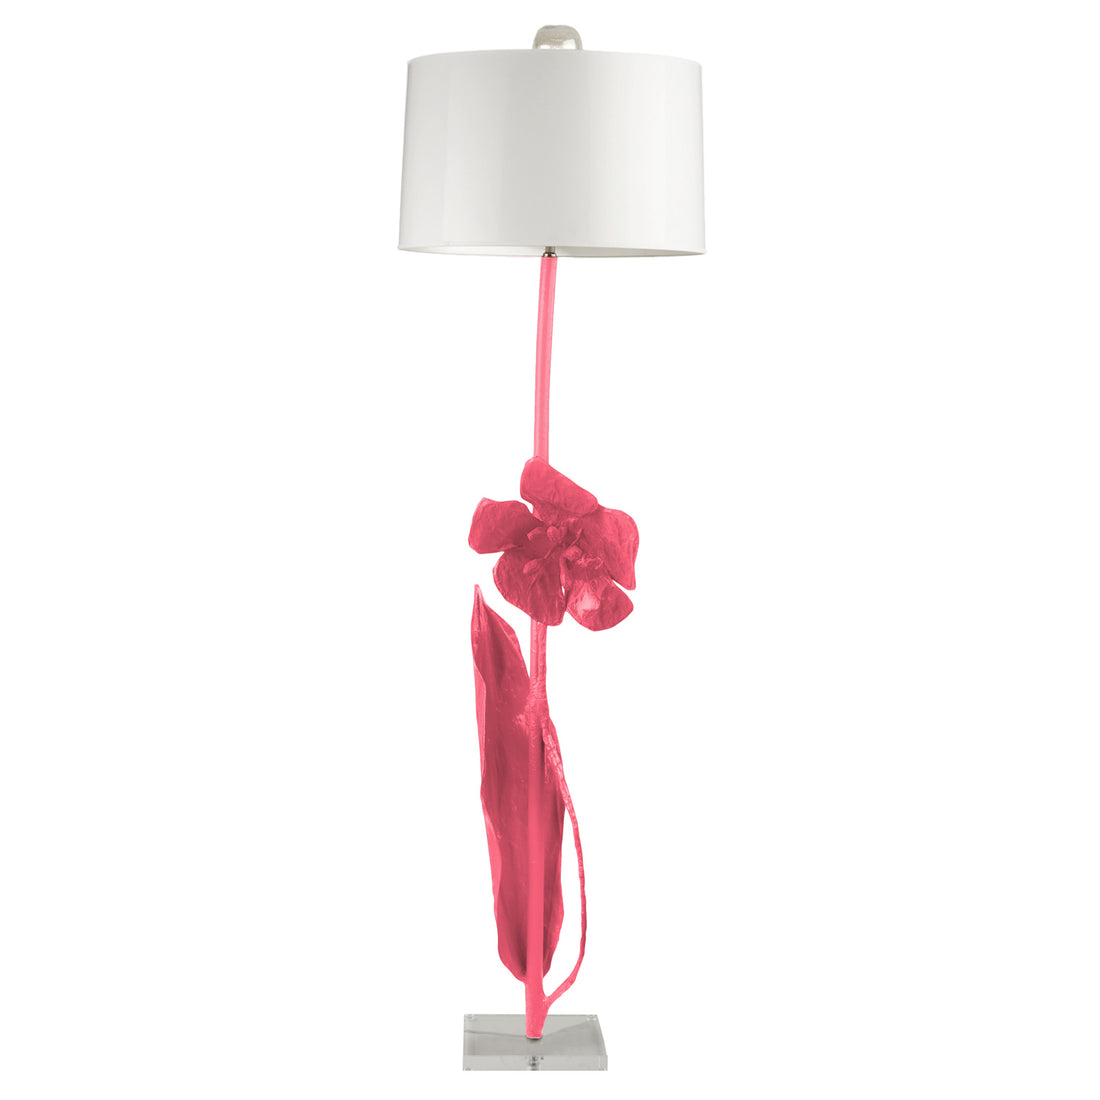 Pink Flower Floor Lamp Made from Paper Mache